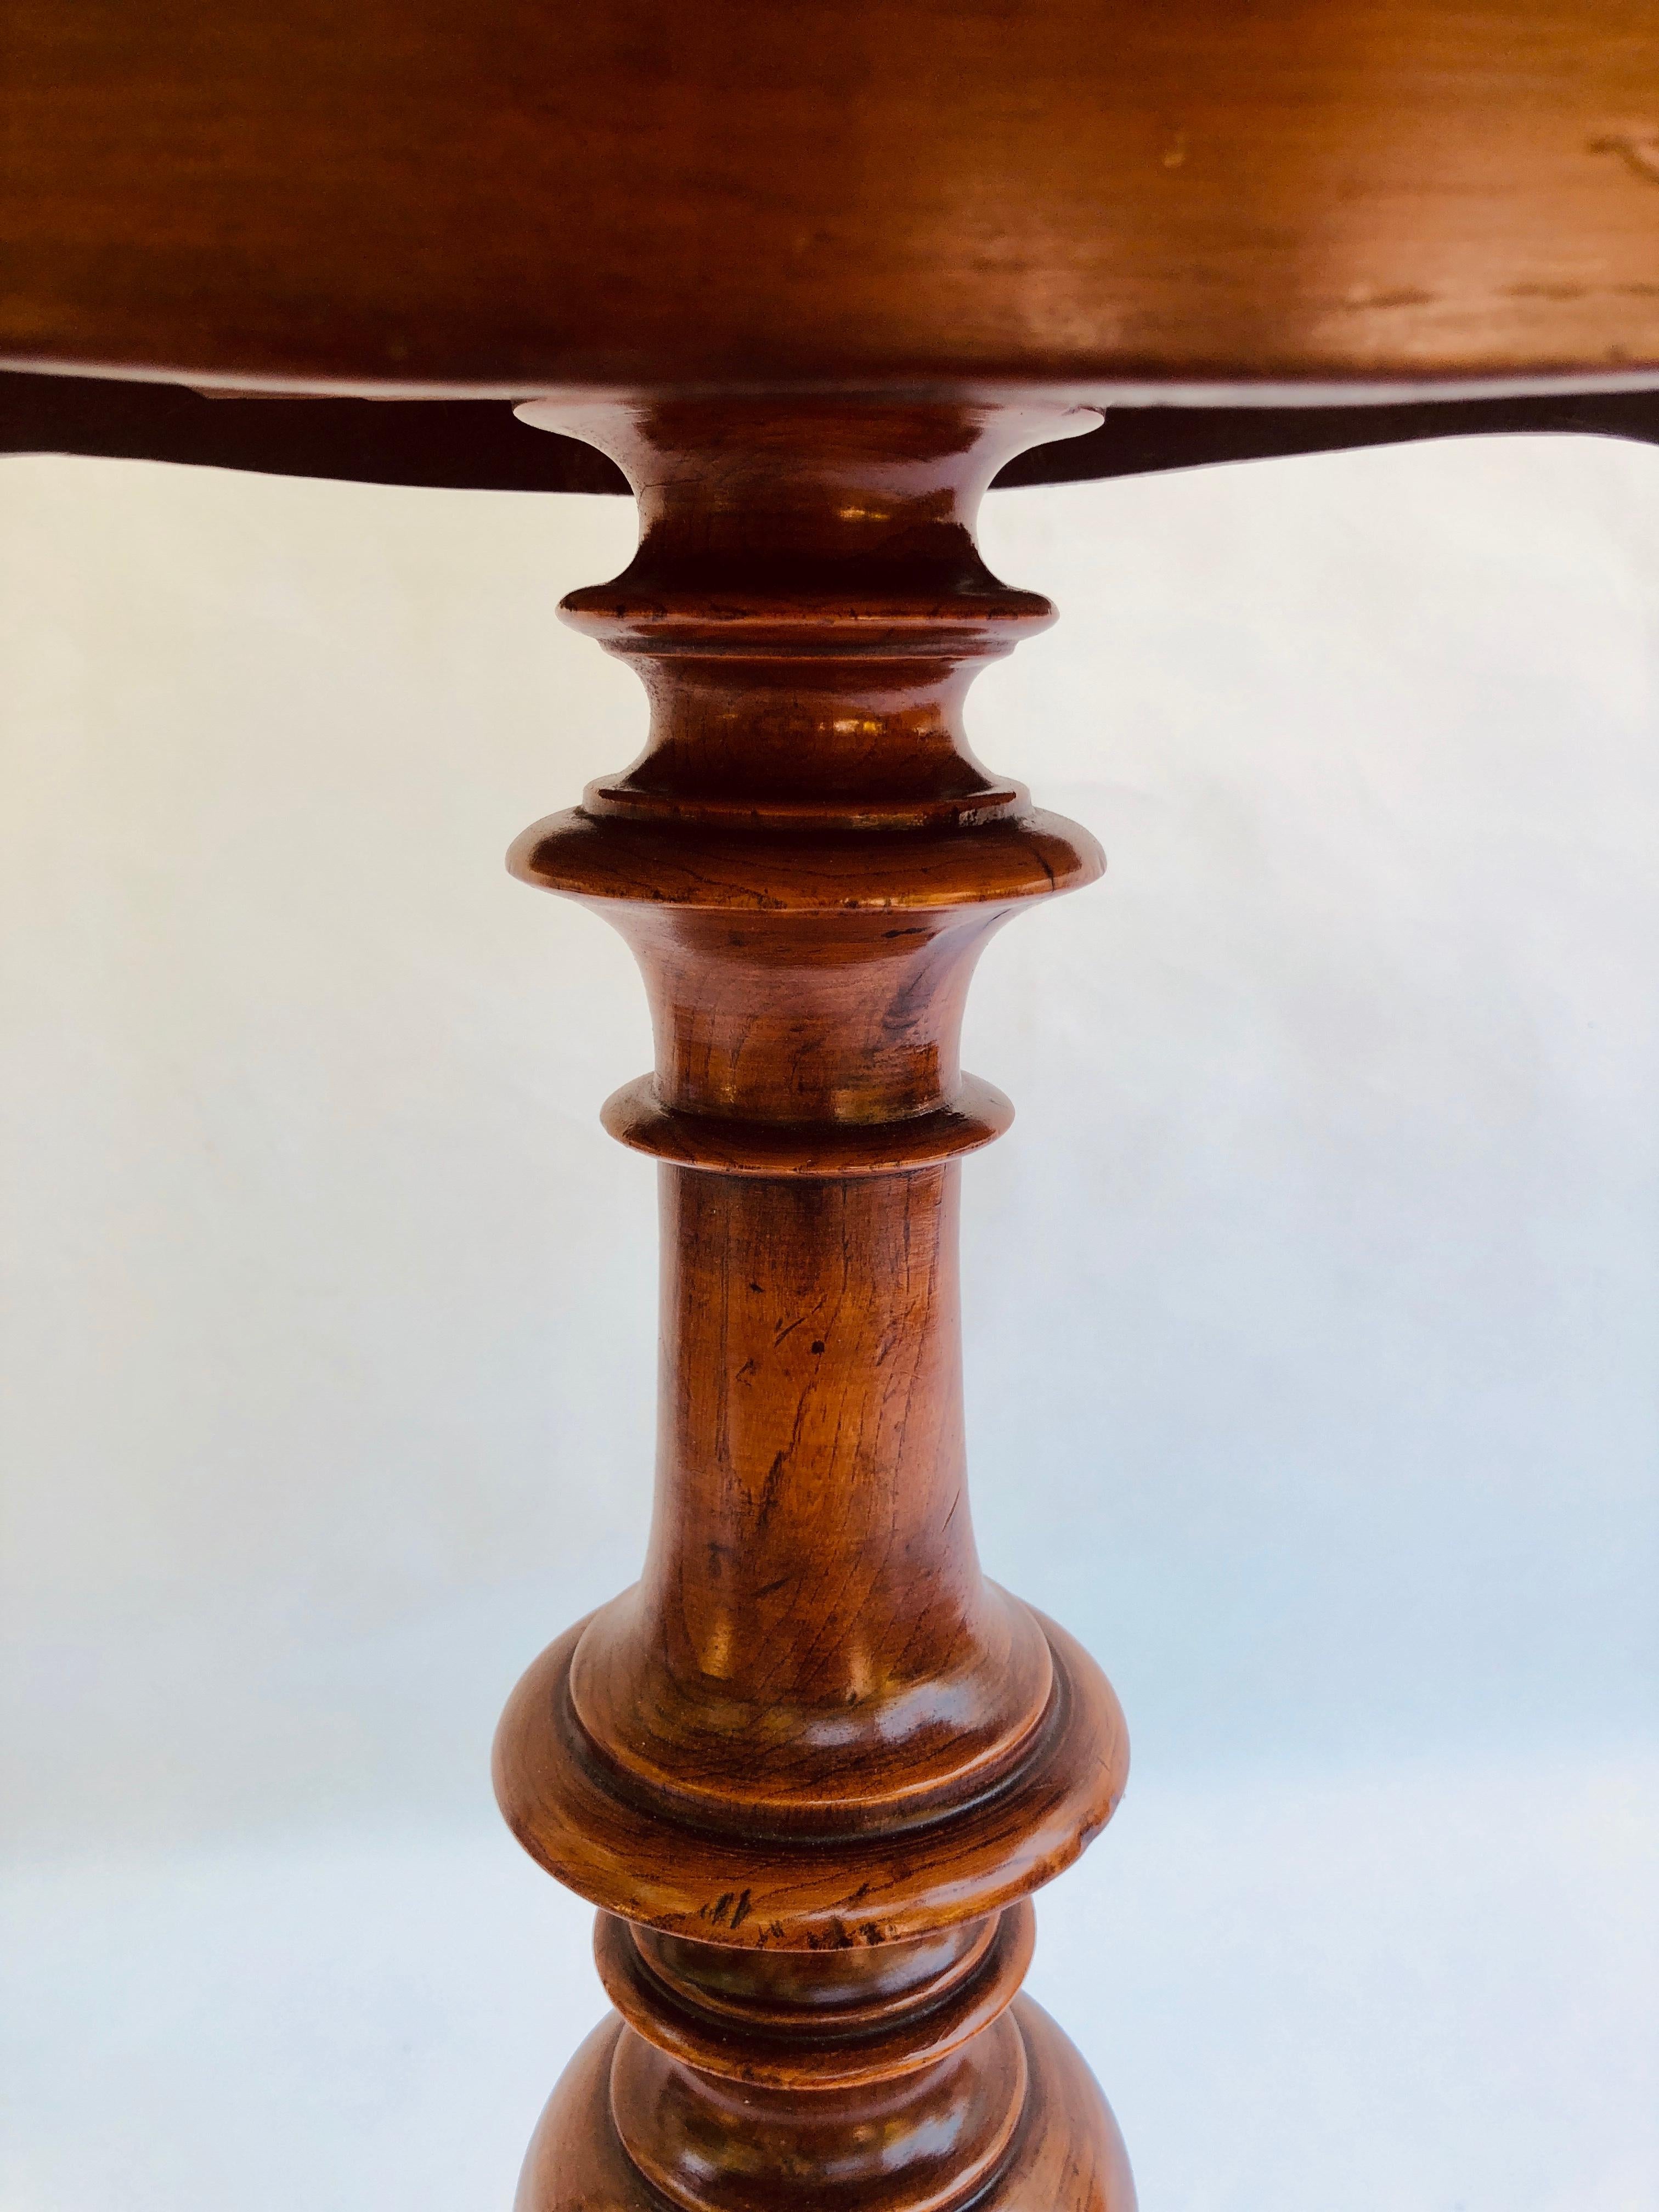 Quality antique 19th century Victorian mahogany lamp/side table having a shaped thumb moulded edge raised on an attractive turned shaped column standing on elegant shaped cabriole legs.

An impressive piece of wonderful color.

WORLDWIDE